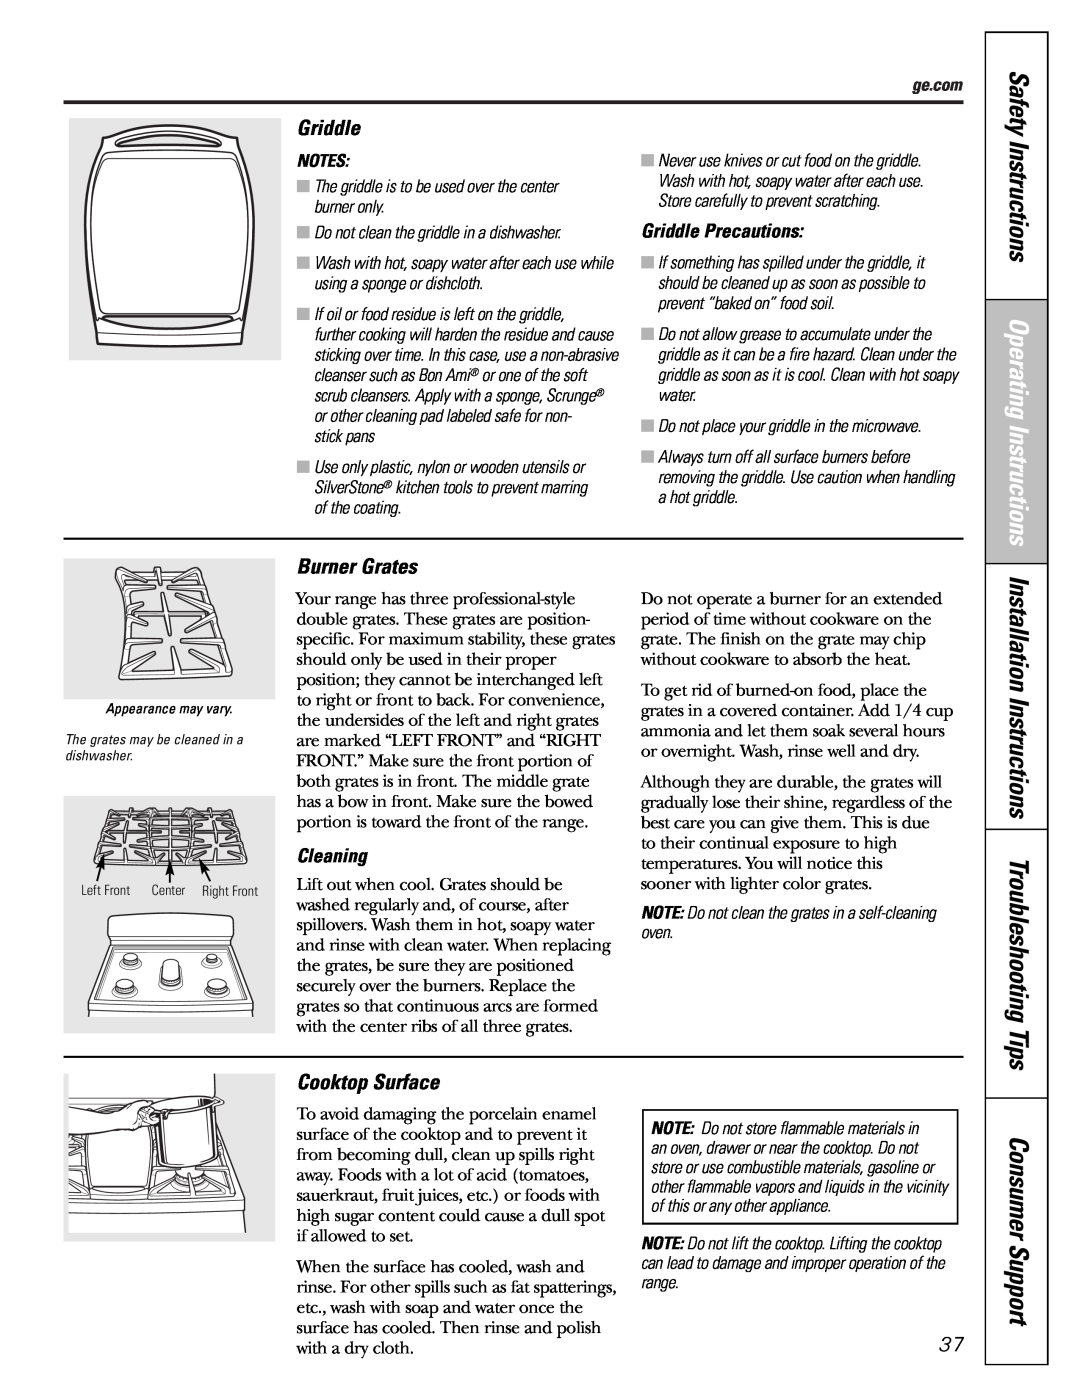 Mabe Canada JGBP86 Installation Instructions Troubleshooting Tips, Griddle, Burner Grates, Cooktop Surface, Safety 